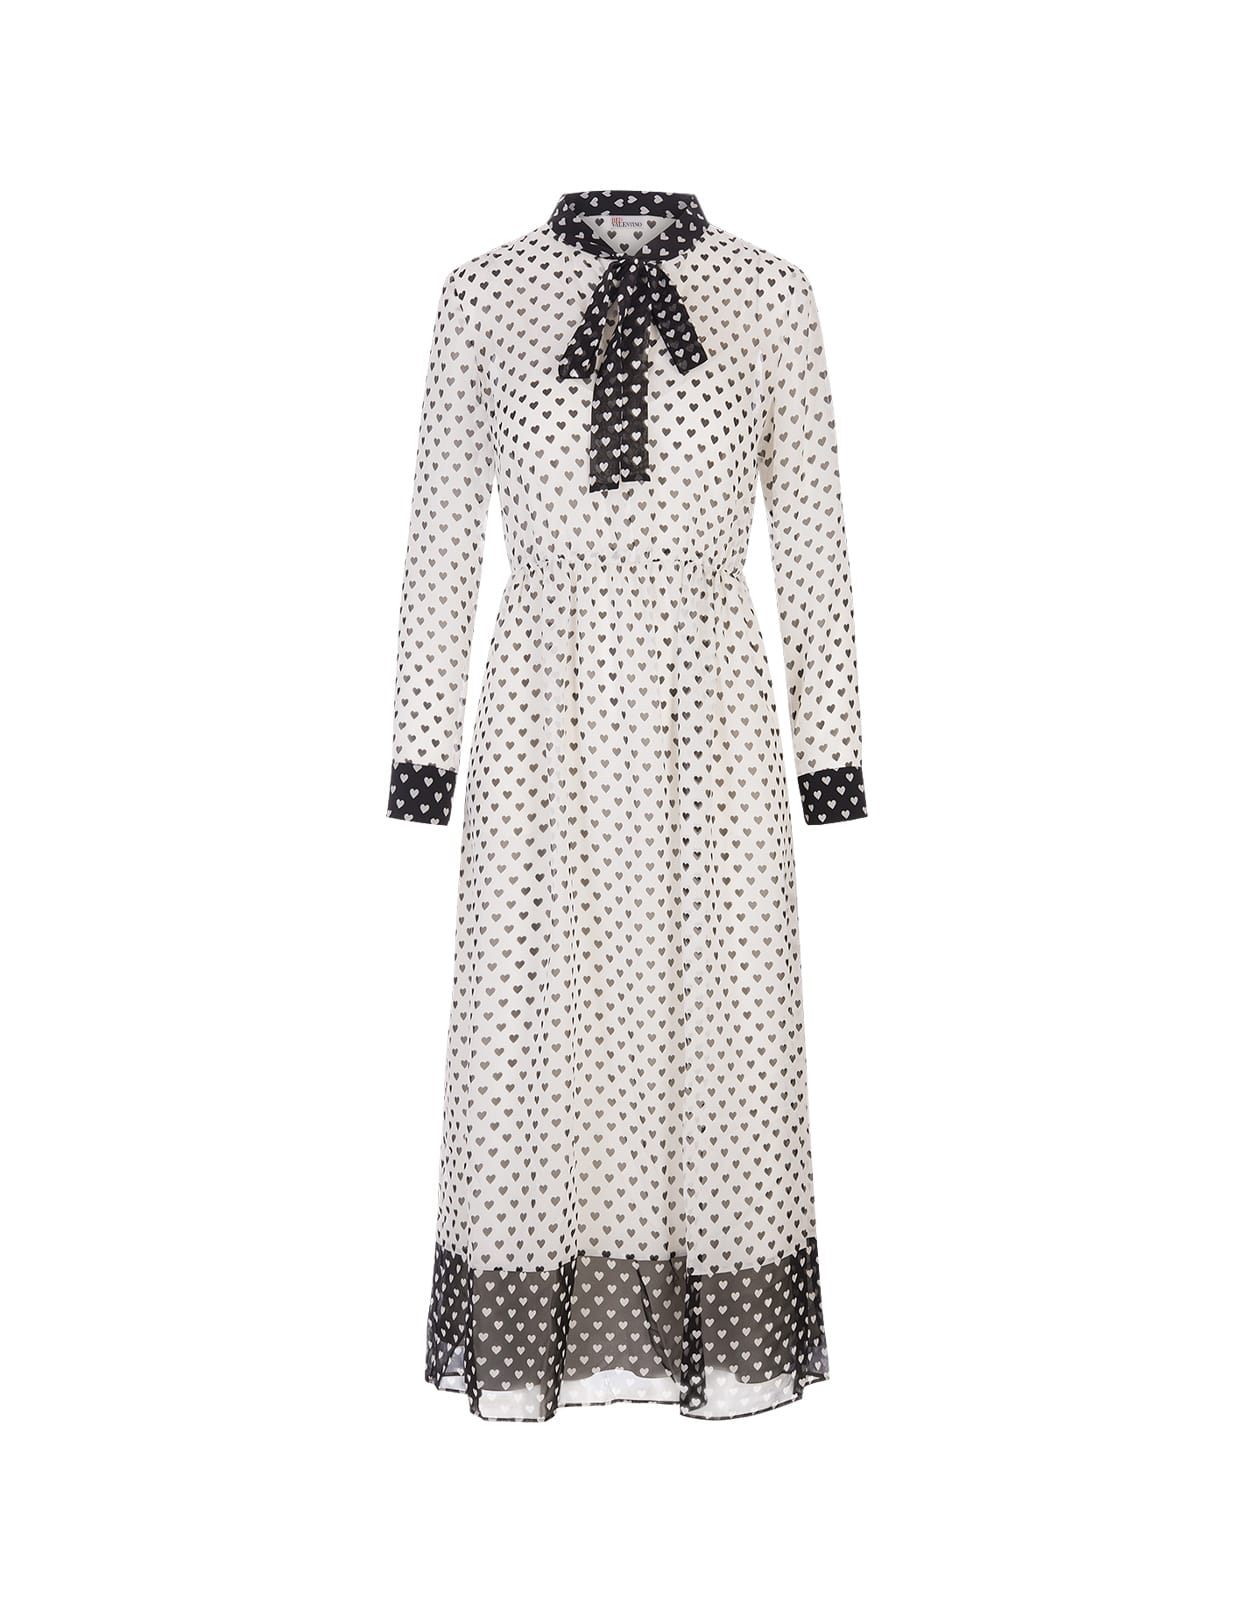 RED VALENTINO WHITE SILK DRESS WITH HEARTS PRINT